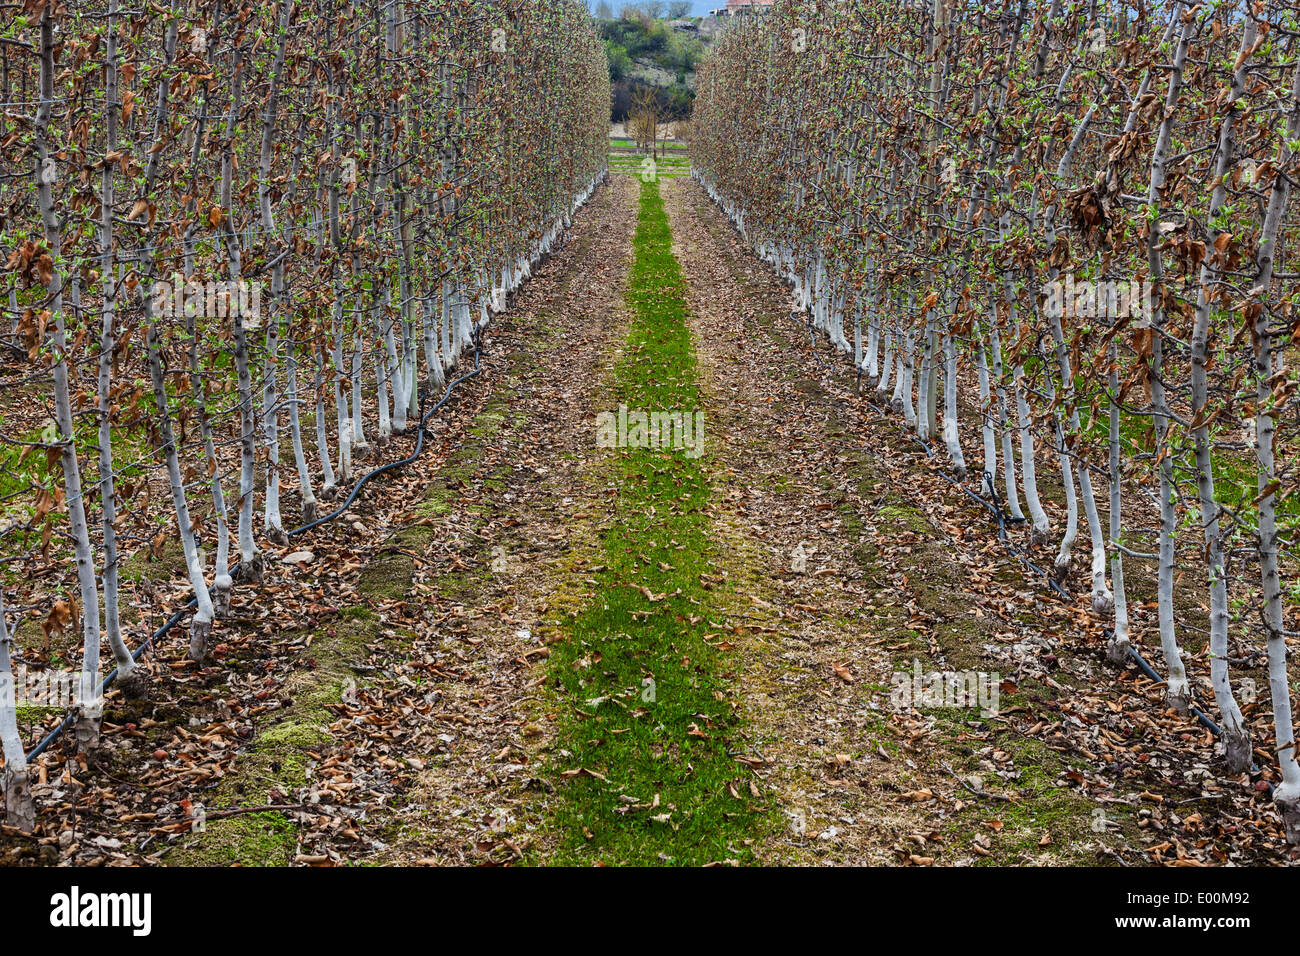 Converging rows of young fruit trees in an Okanagan Valley orchard near Kelowna, British Columbia, Canada Stock Photo